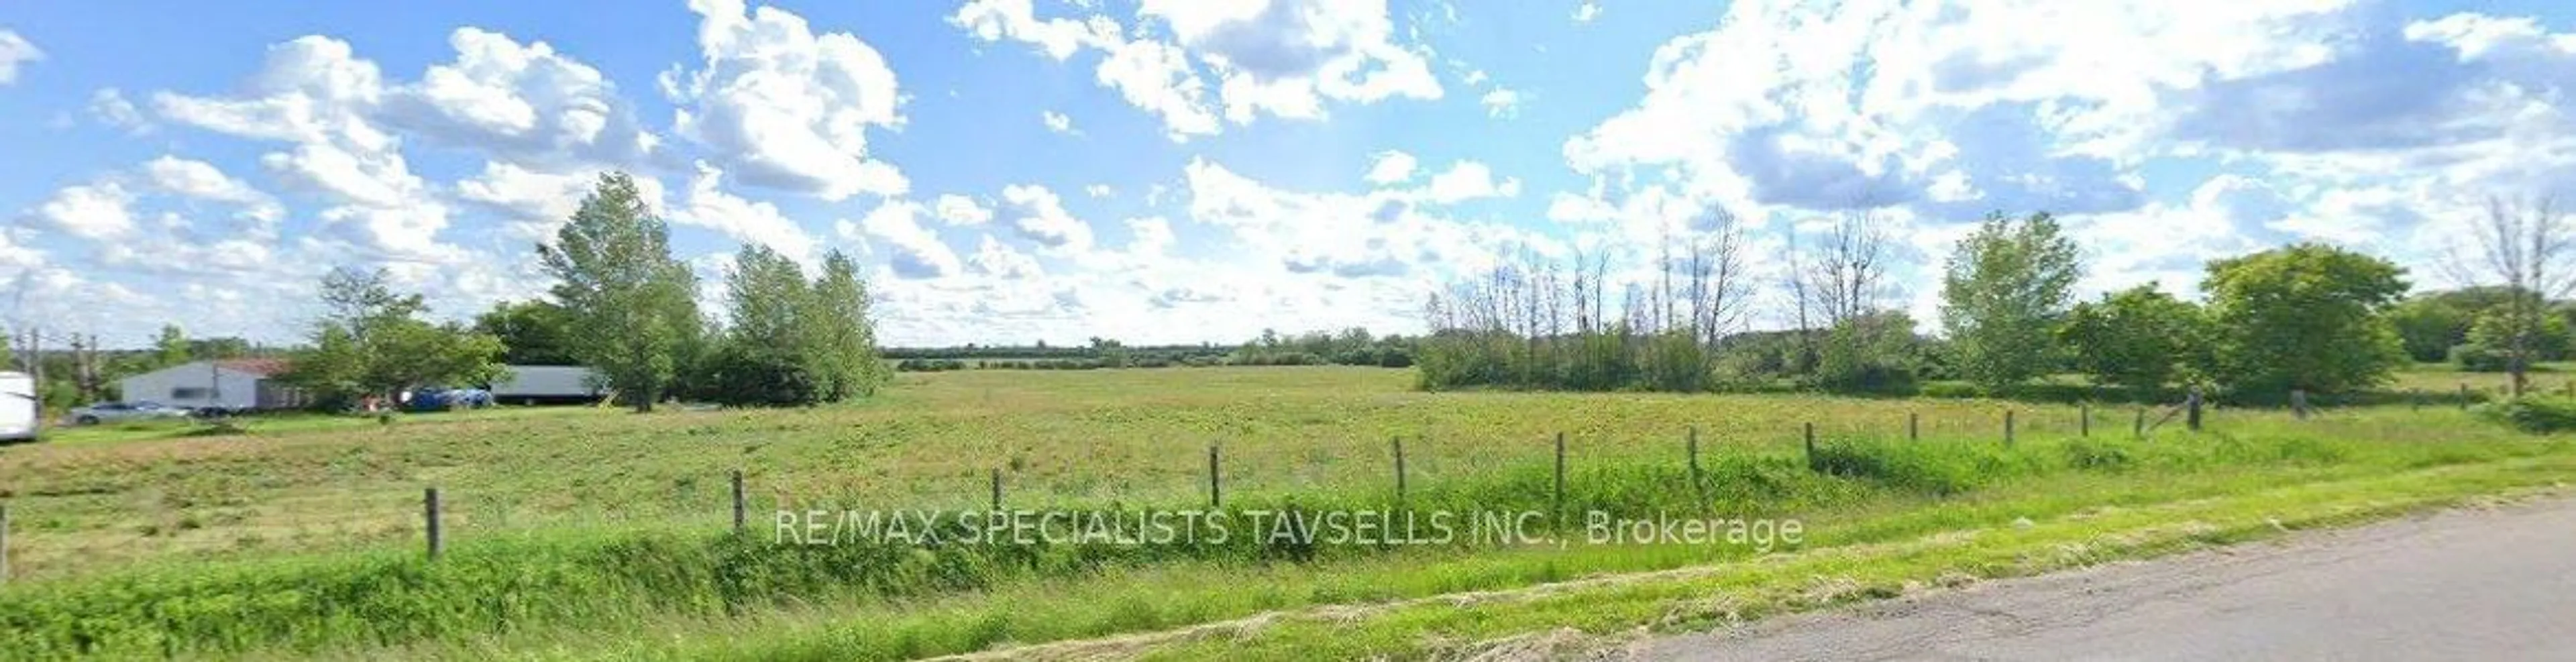 Street view for 12864 Innis Lake Rd, Caledon Ontario L7C 2Y4